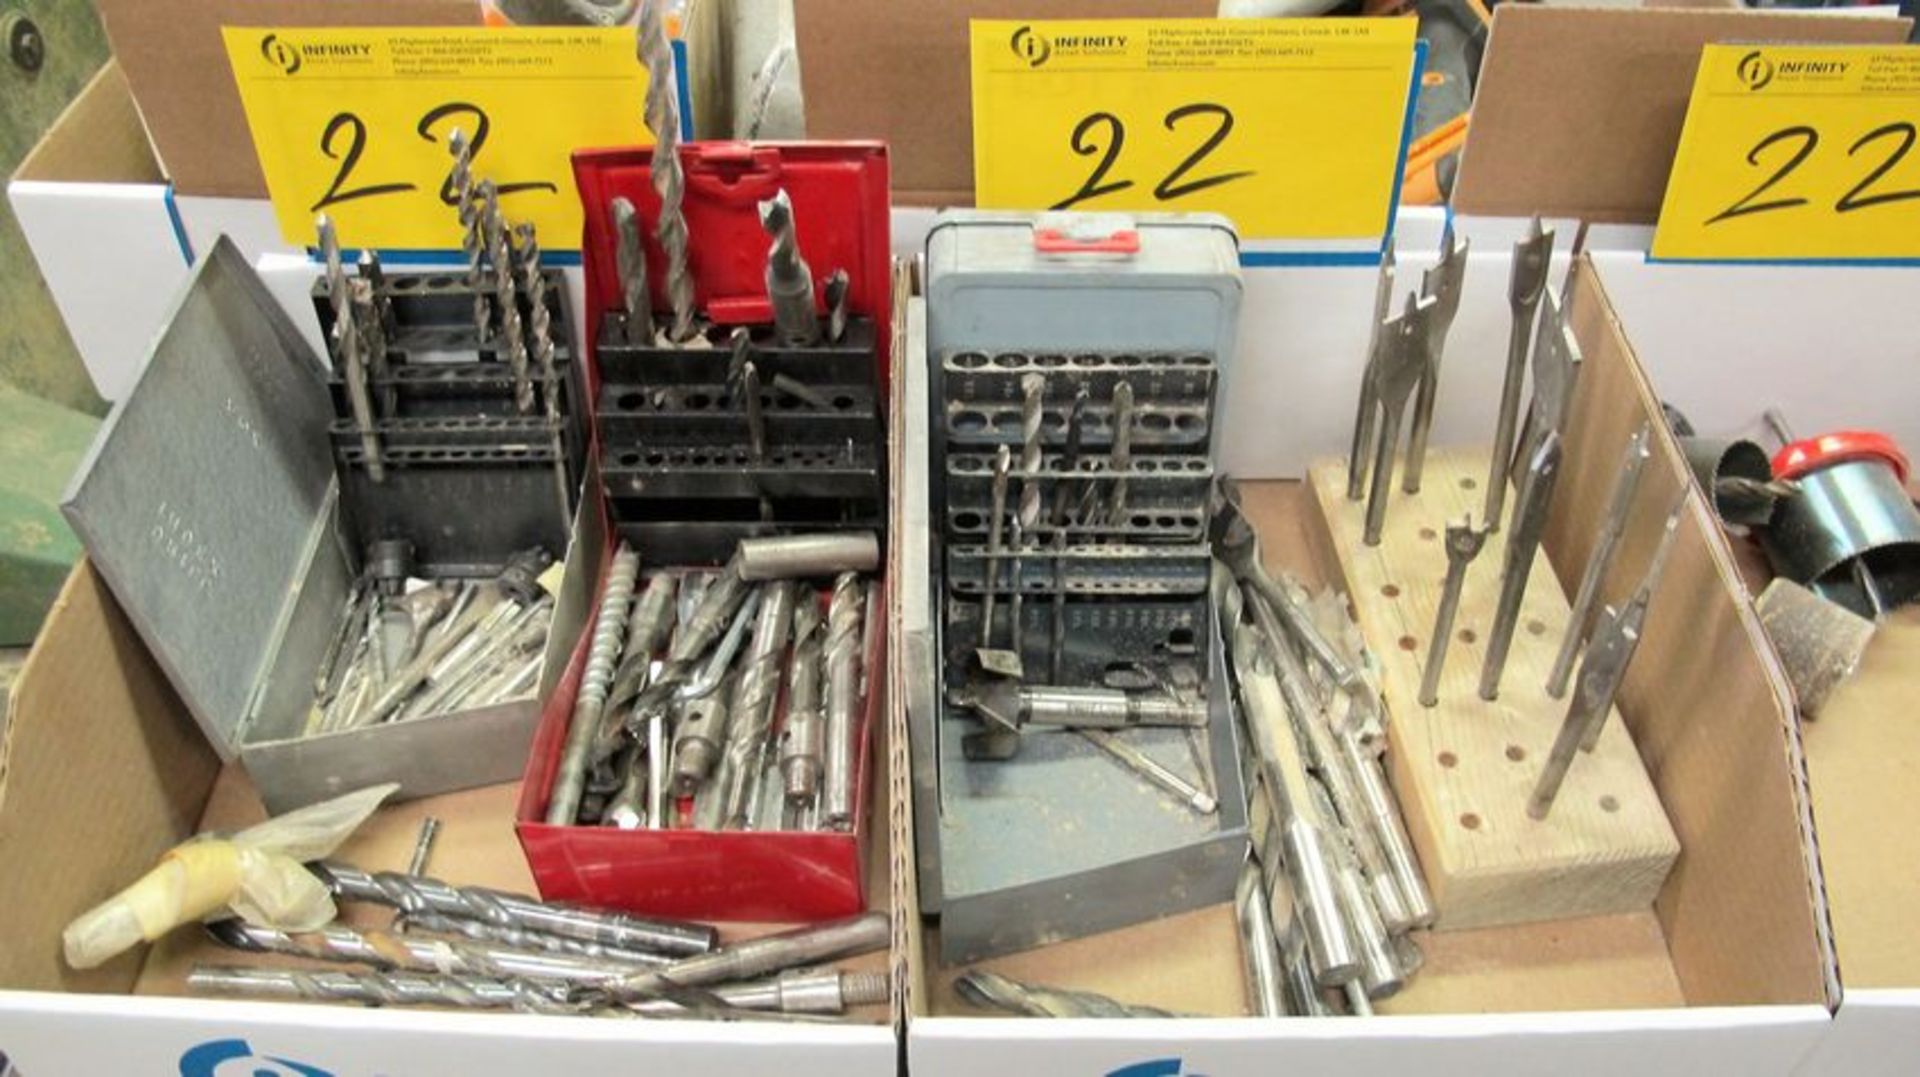 LOT OF ASST. DRILL BITS, CUTTERS, TOOLING, ETC. - Image 2 of 3